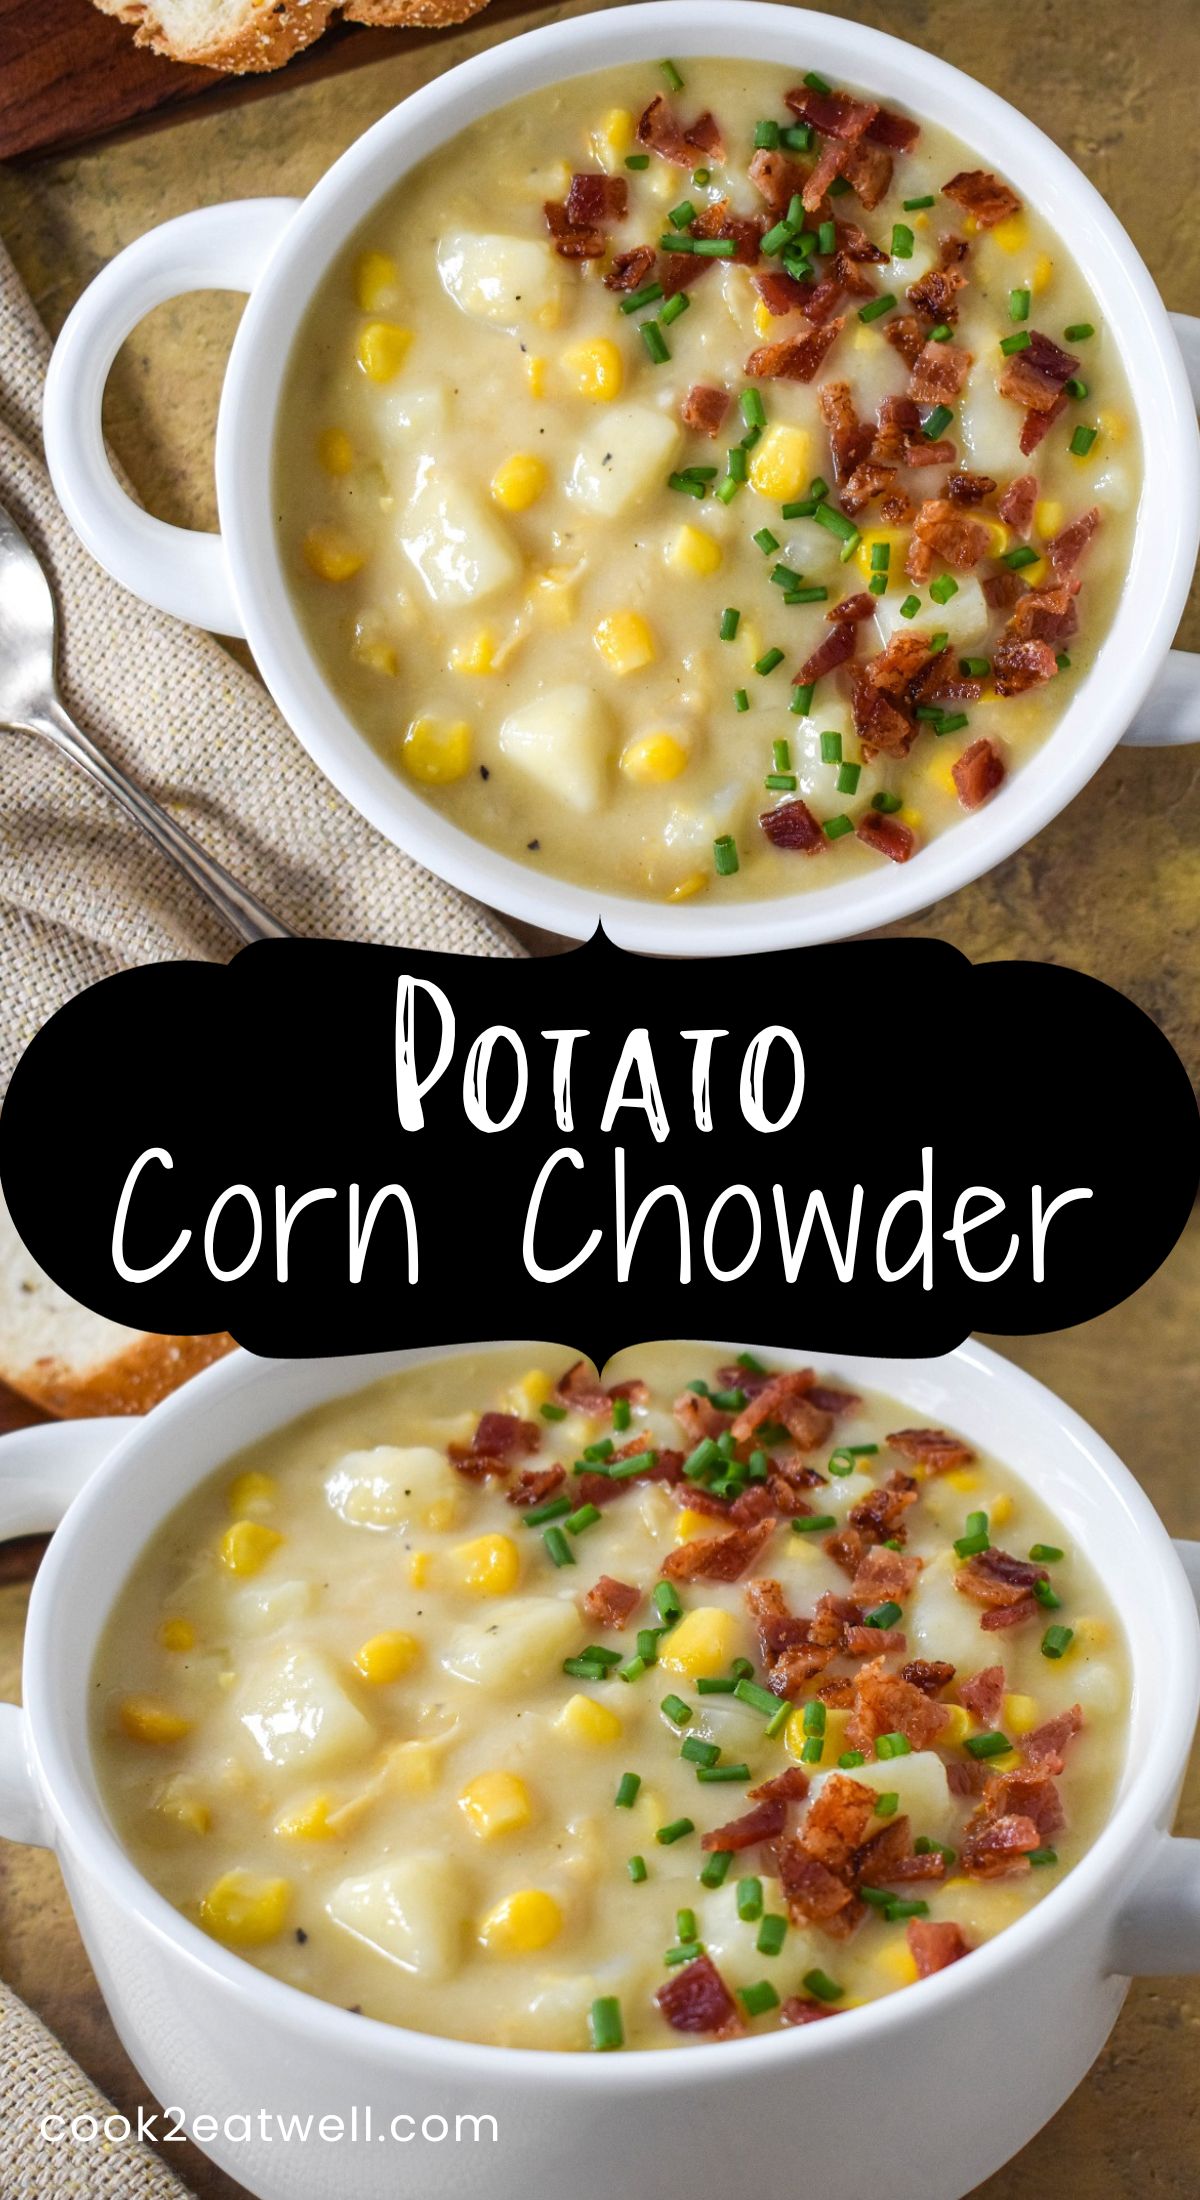 Two pictures of the potato corn chowder served in a white bowl with a black graphic between them with the title in white letters.